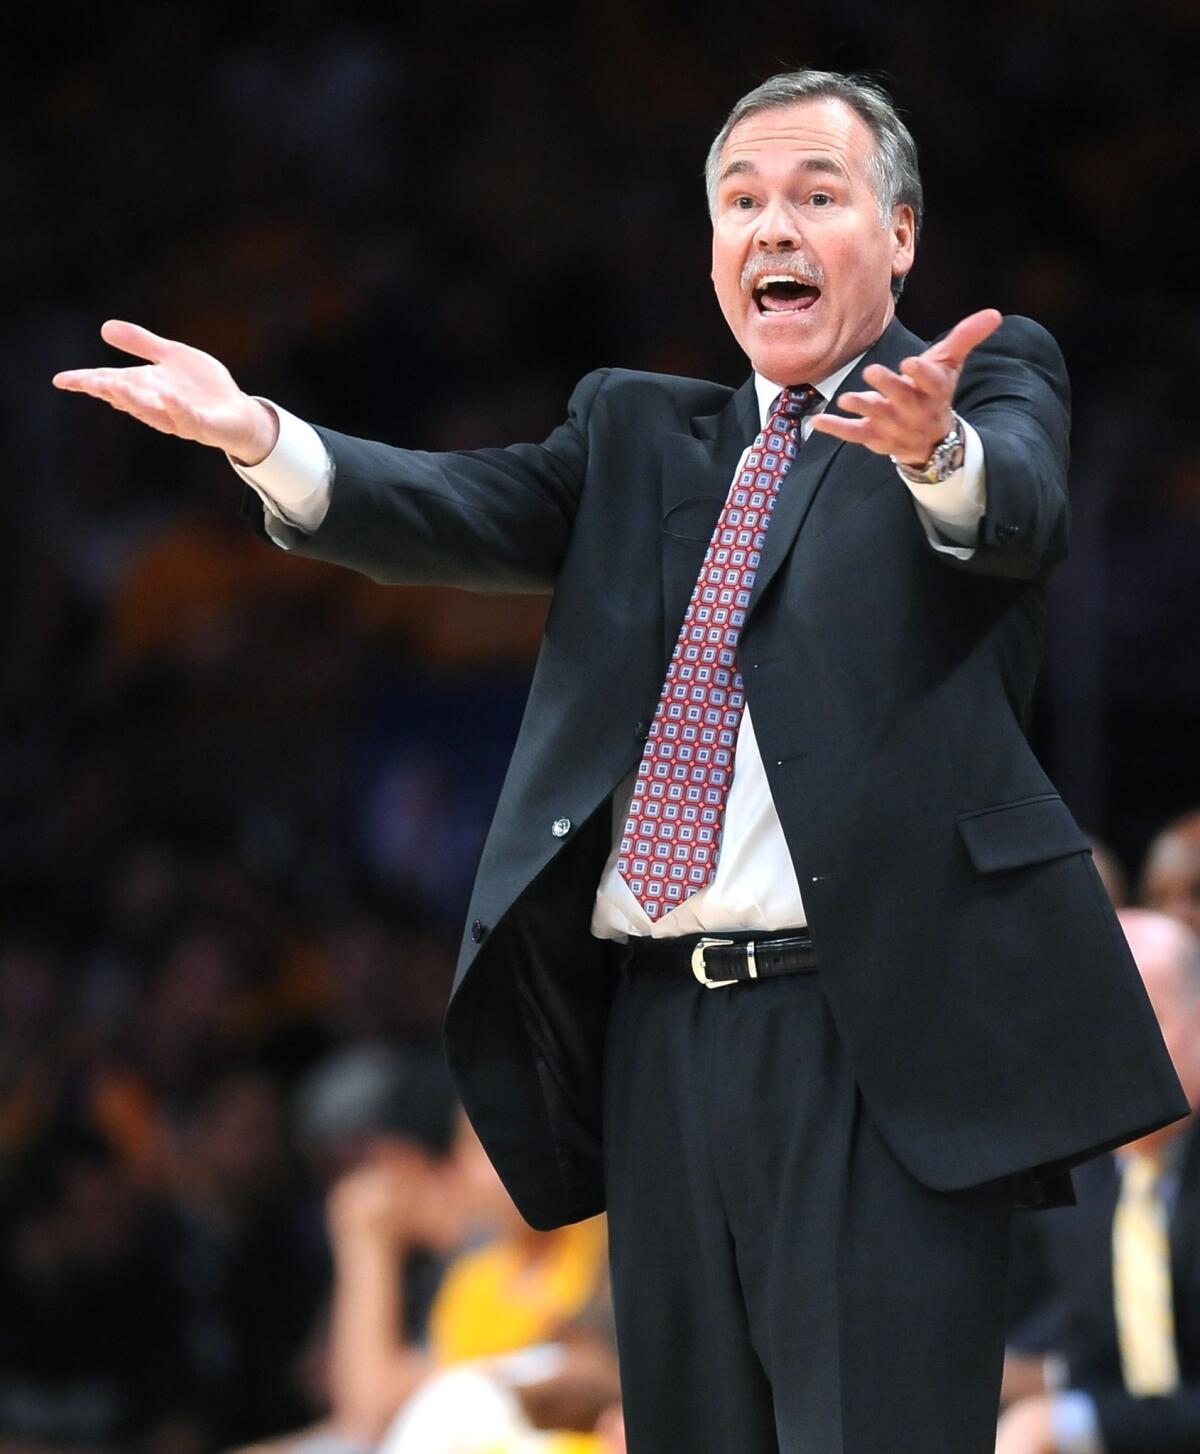 Lakers Coach Mike D'Antoni appears to have abandoned his quest of having the Lakers run a speedy offense.